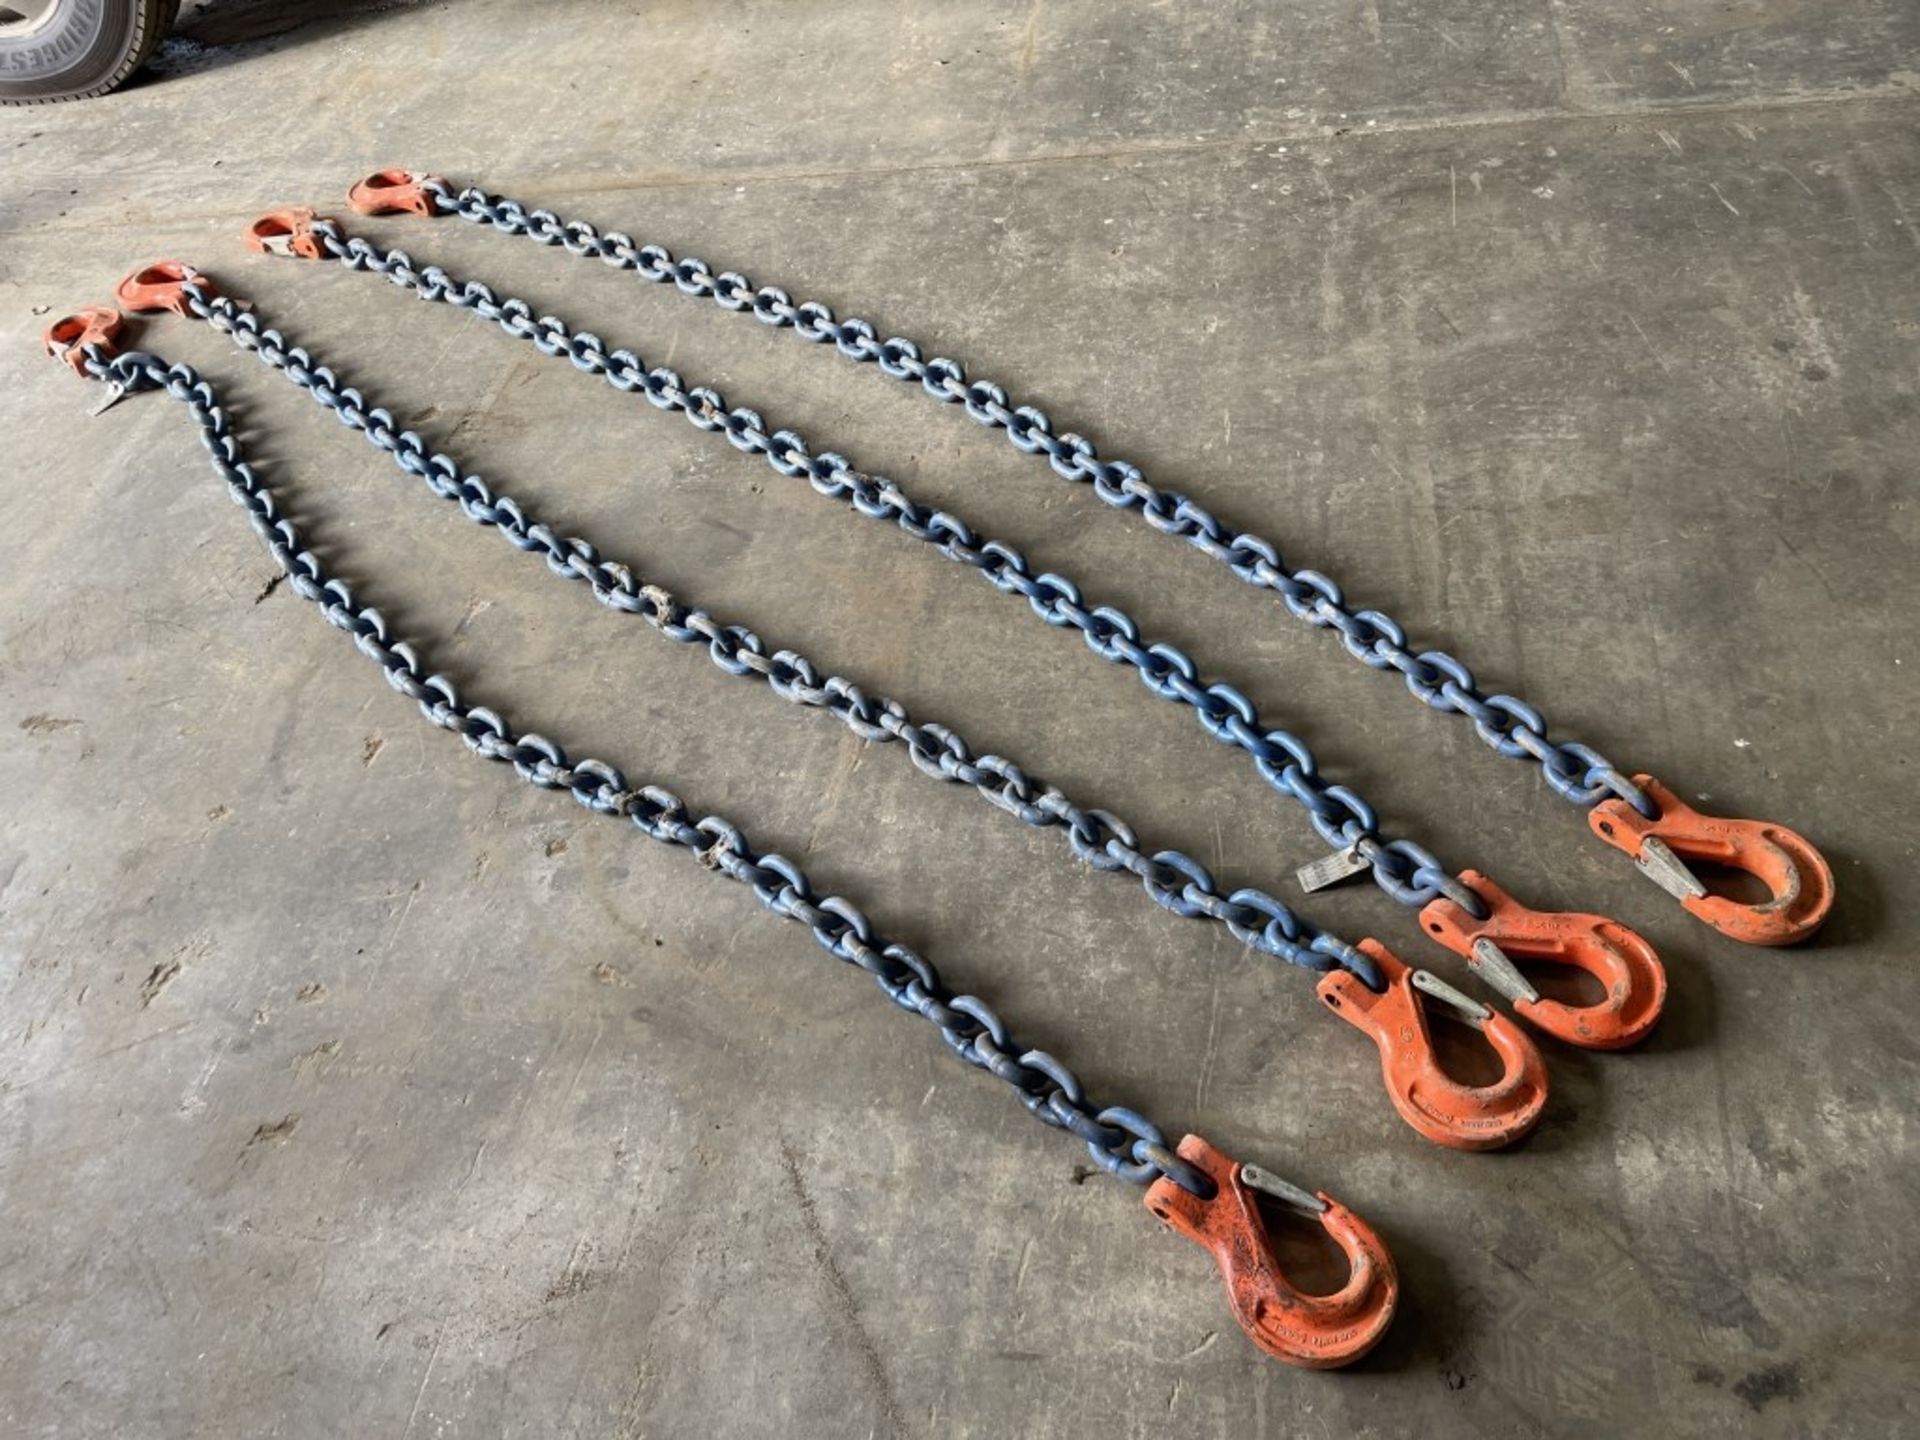 Woods 3/4" Lifting Chains, Qty. 4 - Image 2 of 4